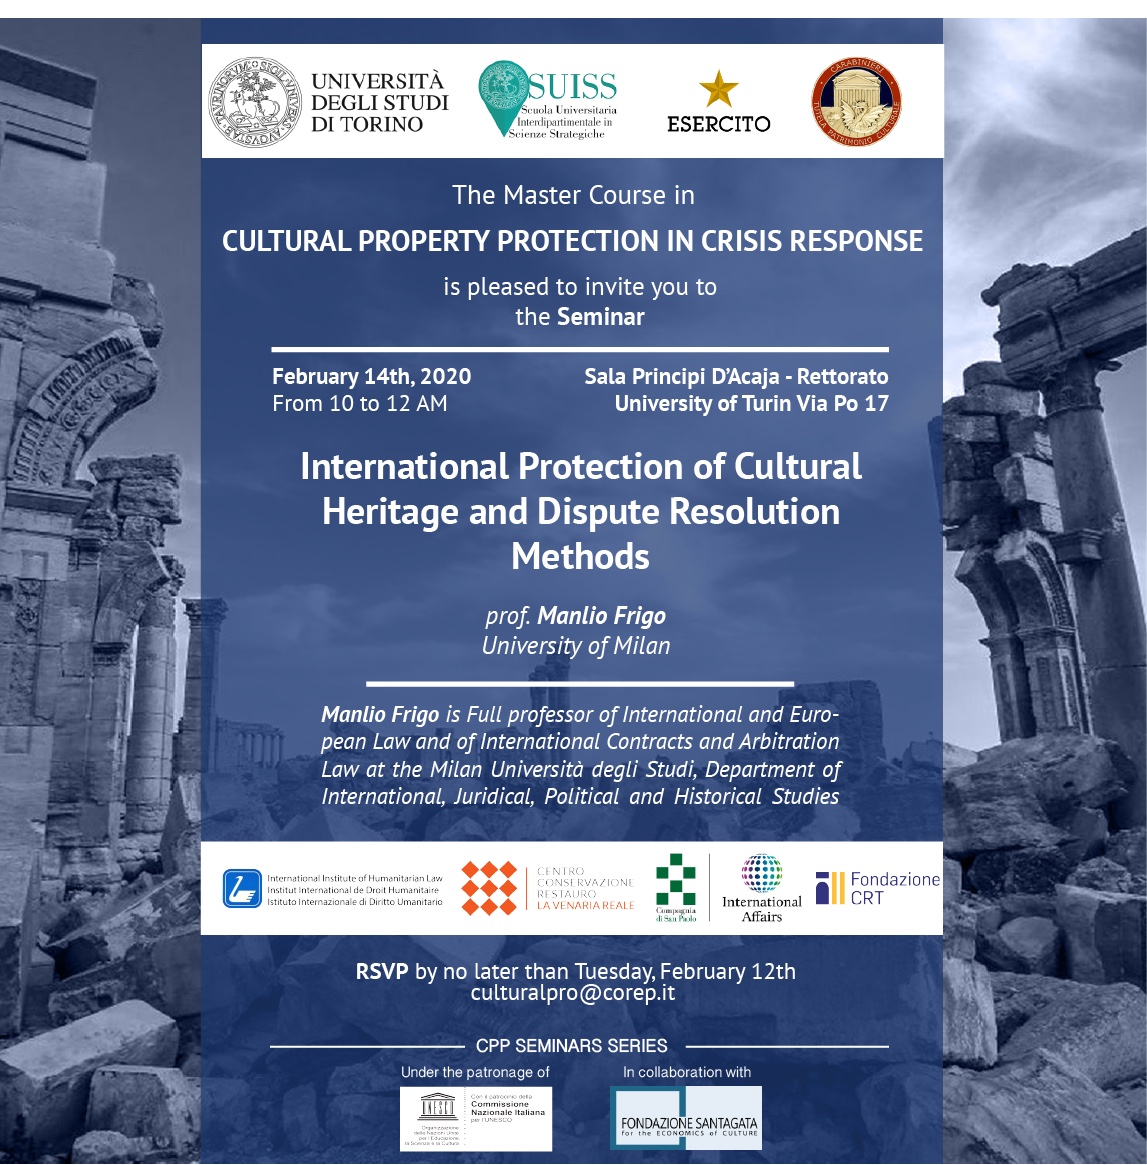 International Protection of Cultural Heritage and Dispute Resolution Methods” by Professor Manlio Frigo of the University of Milan